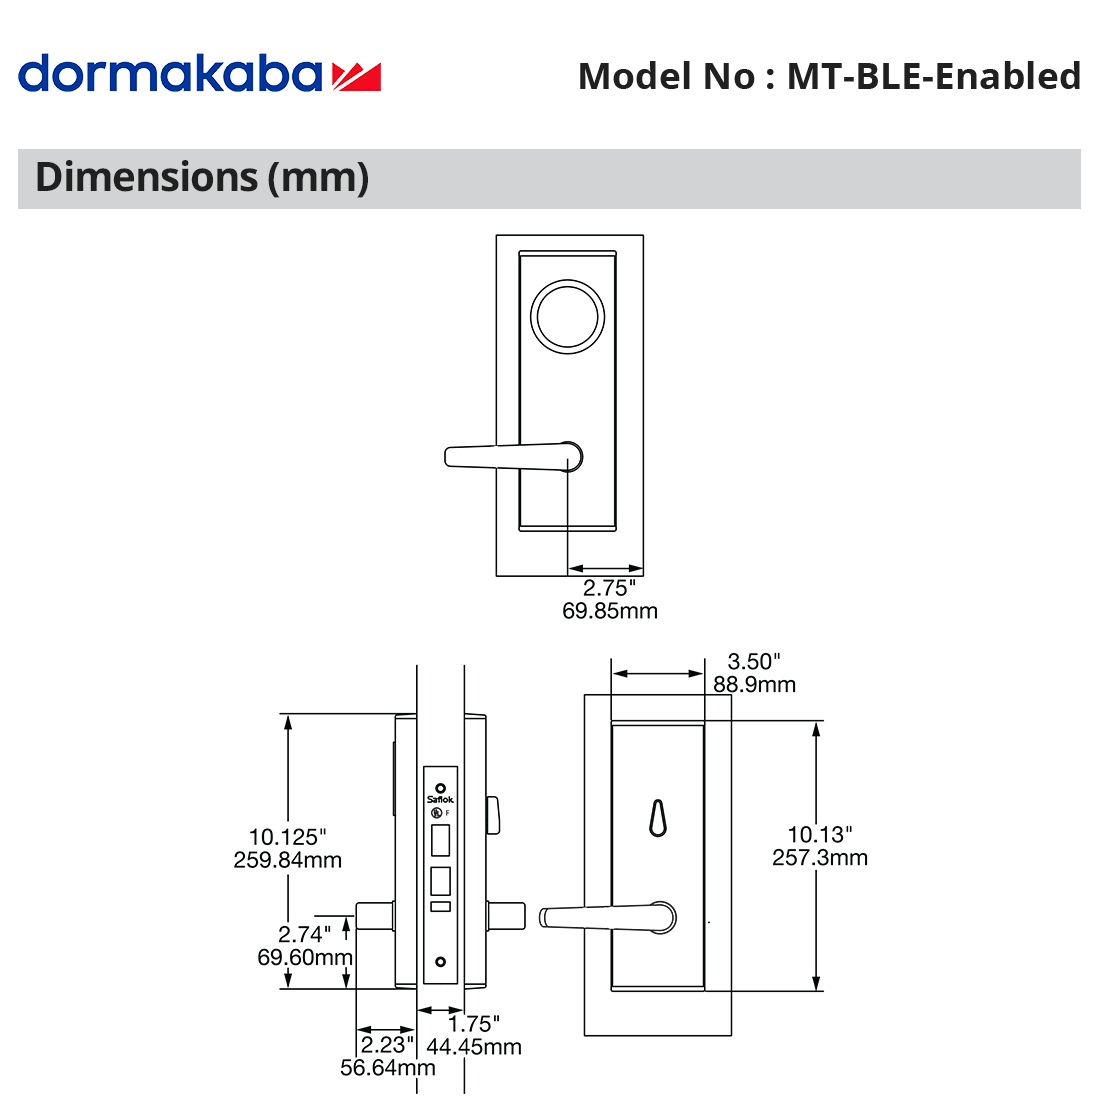 MT-BLE Enabled Dimensions